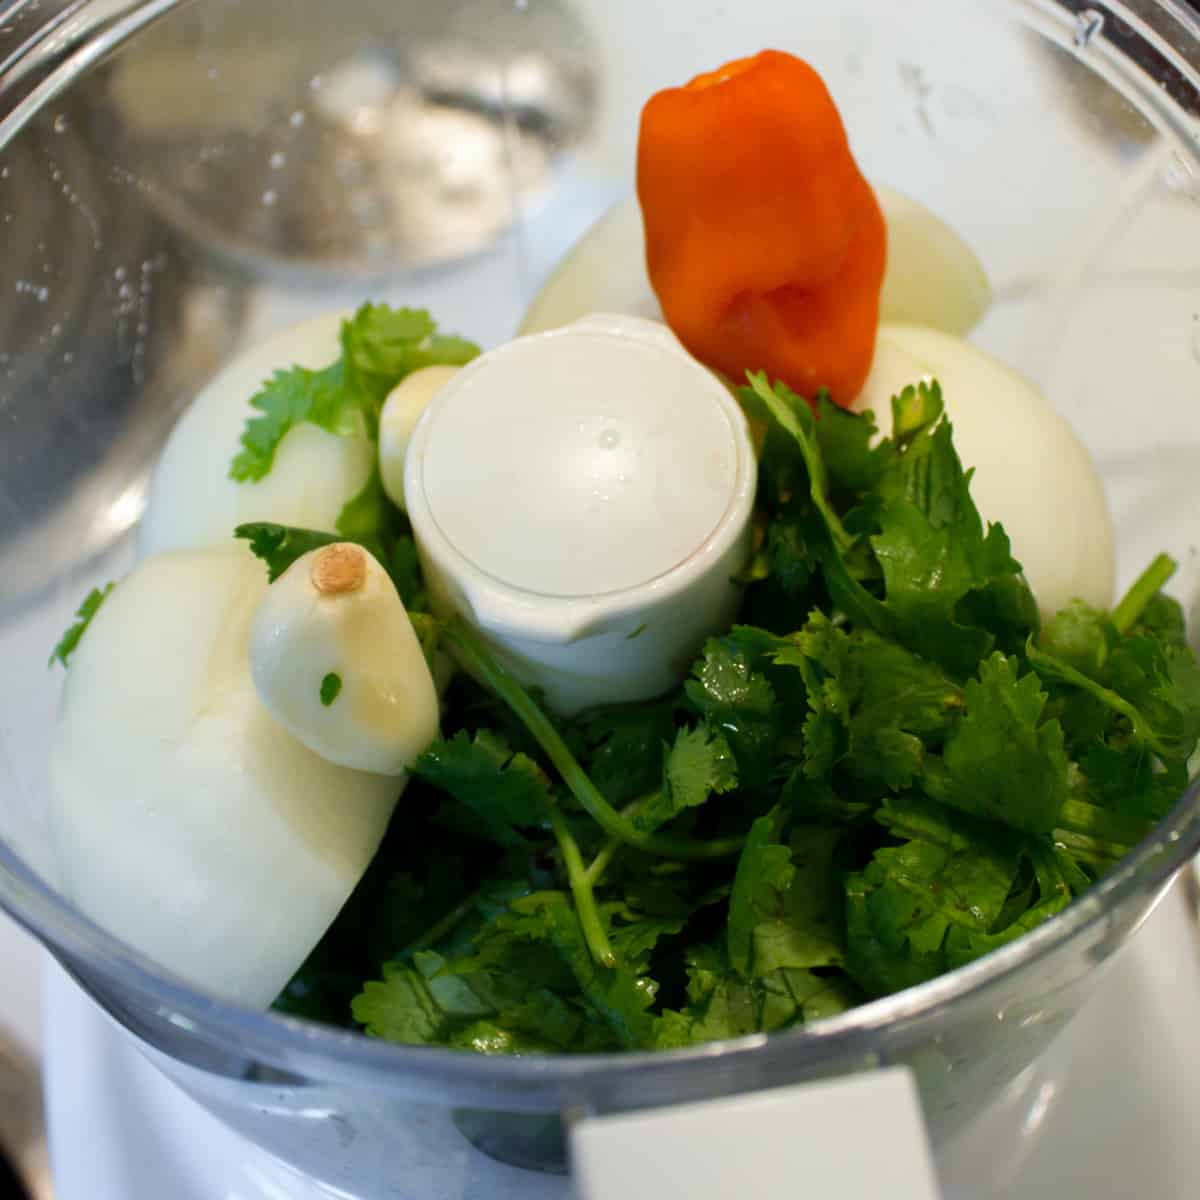 Ingredients for the curry paste in a food processor.